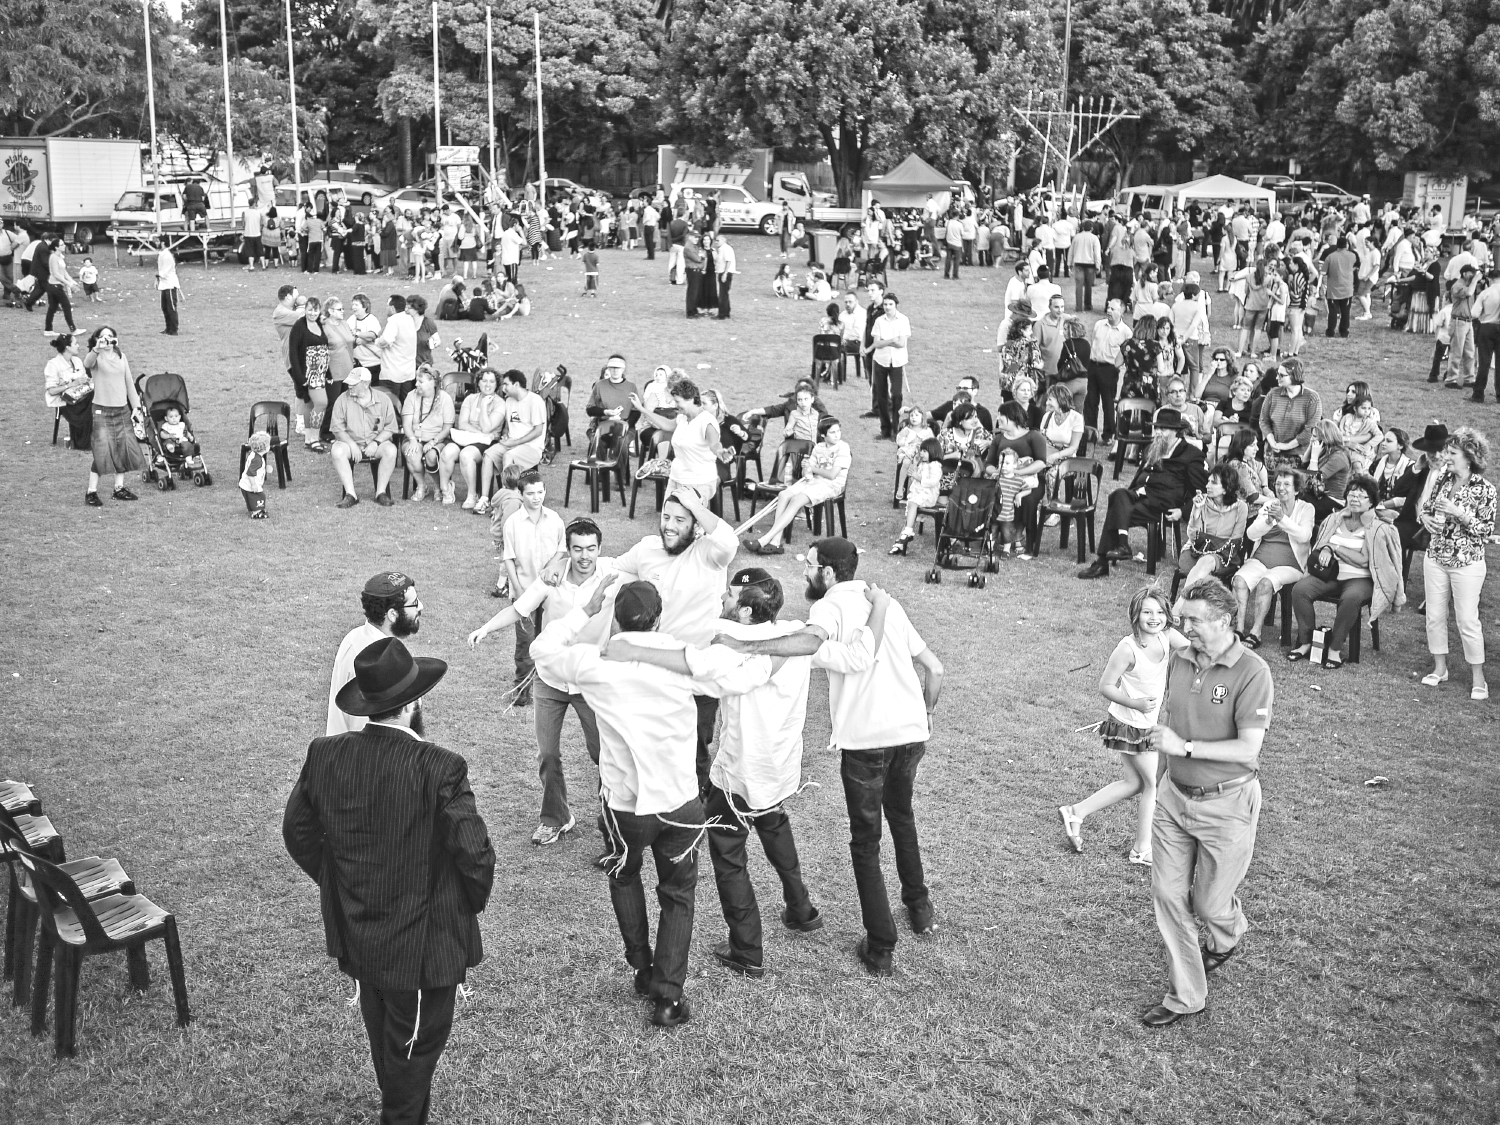 Men and women dance in a park at a community event with a crowd of people watching on.